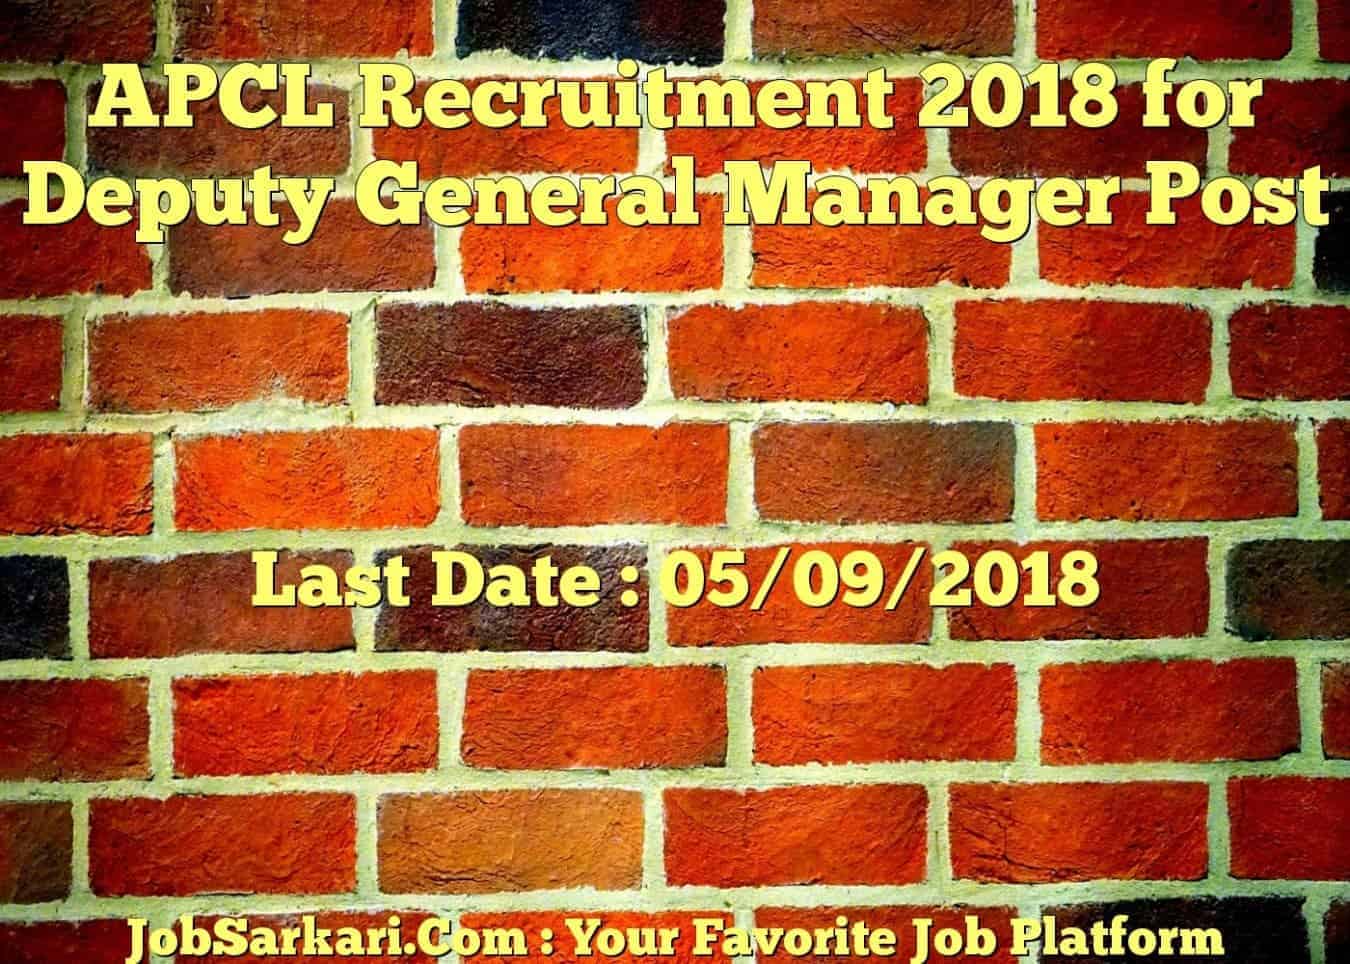 APCL Recruitment 2018 for Deputy General Manager Post